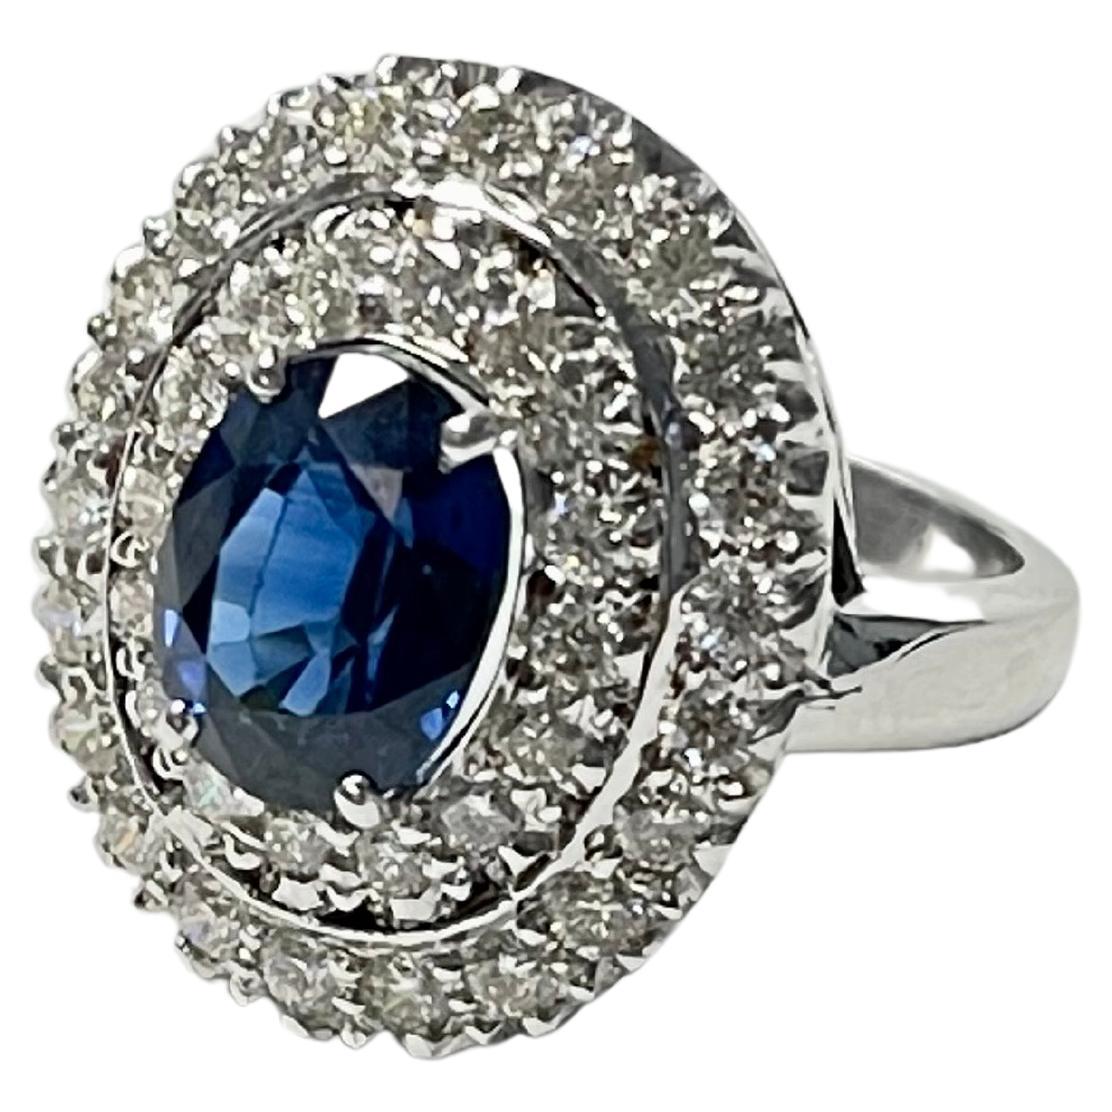 Blue Sapphire Oval and White Diamond Engagement Ring In 18K White Gold. 